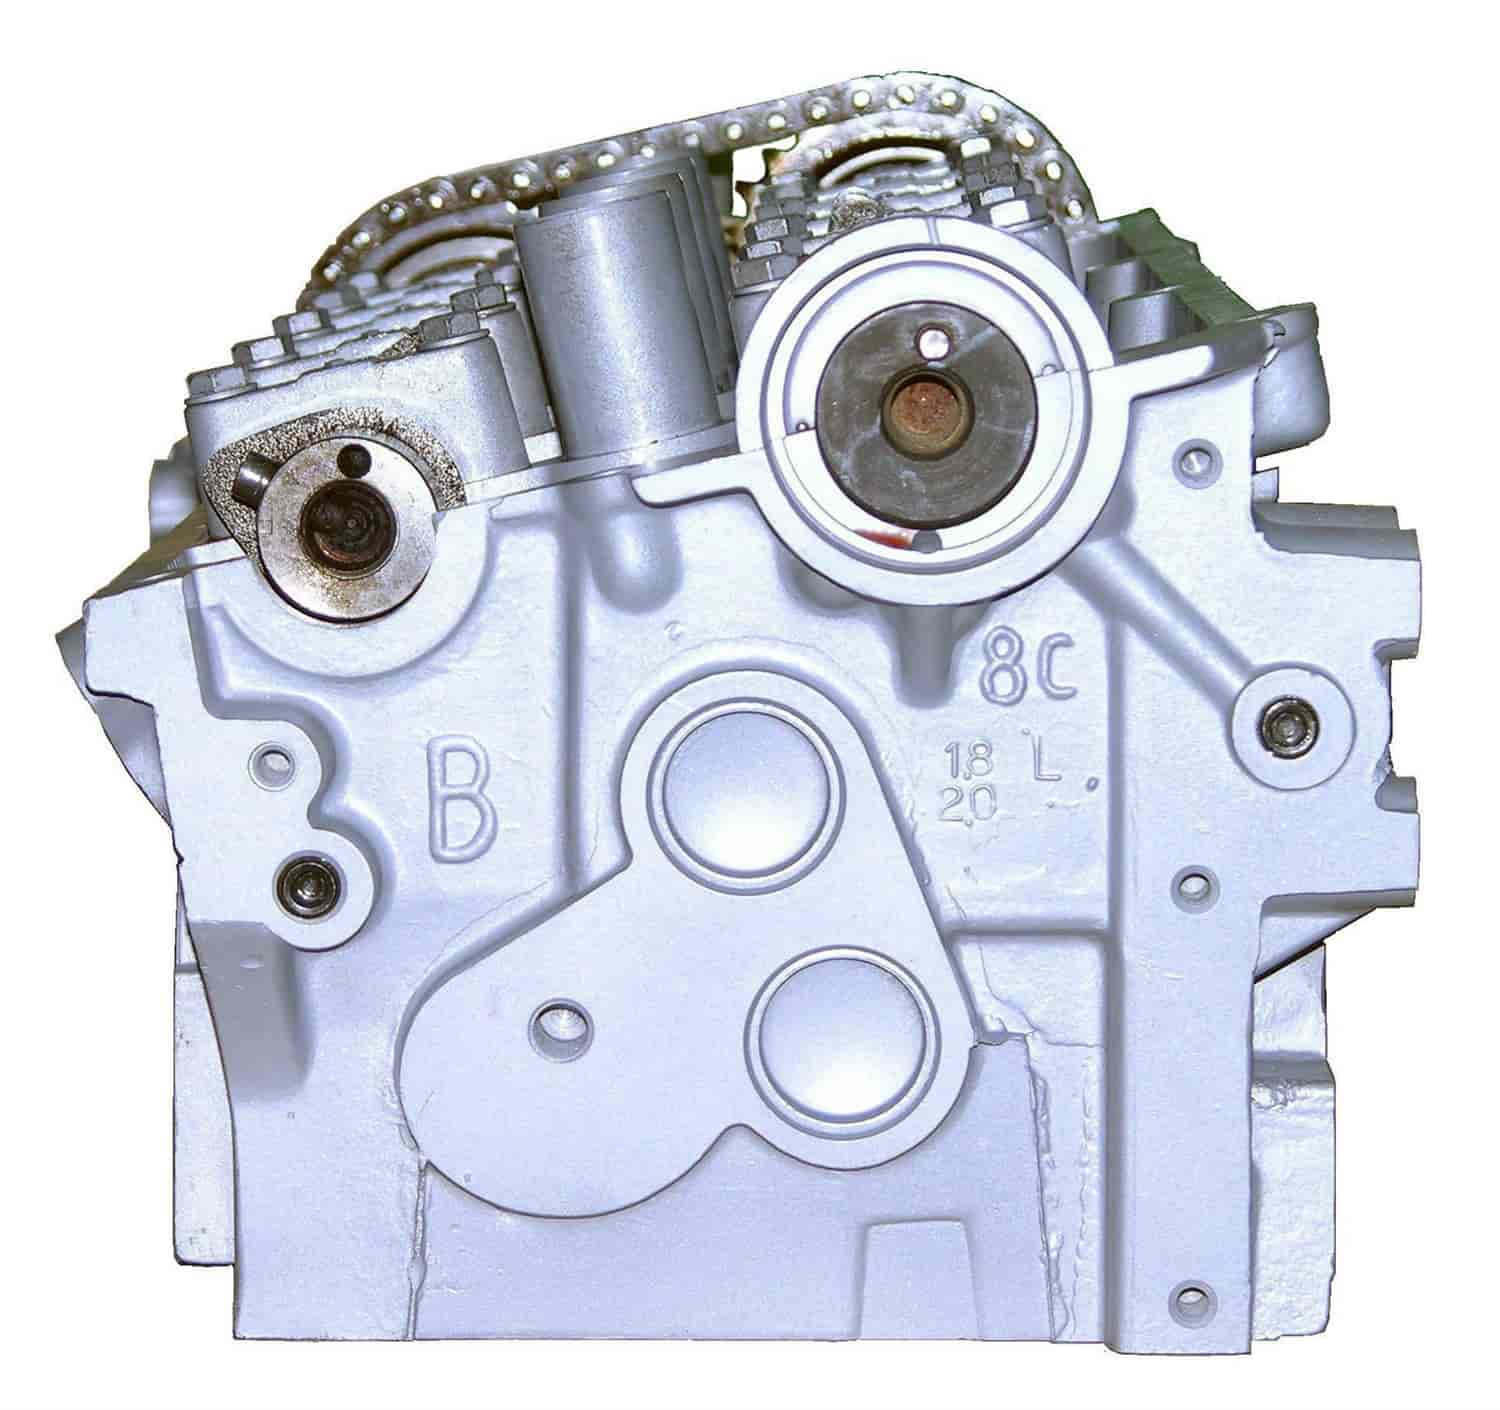 Remanufactured Cylinder Head for 1997-2001 Hyundai with 2.0L L4